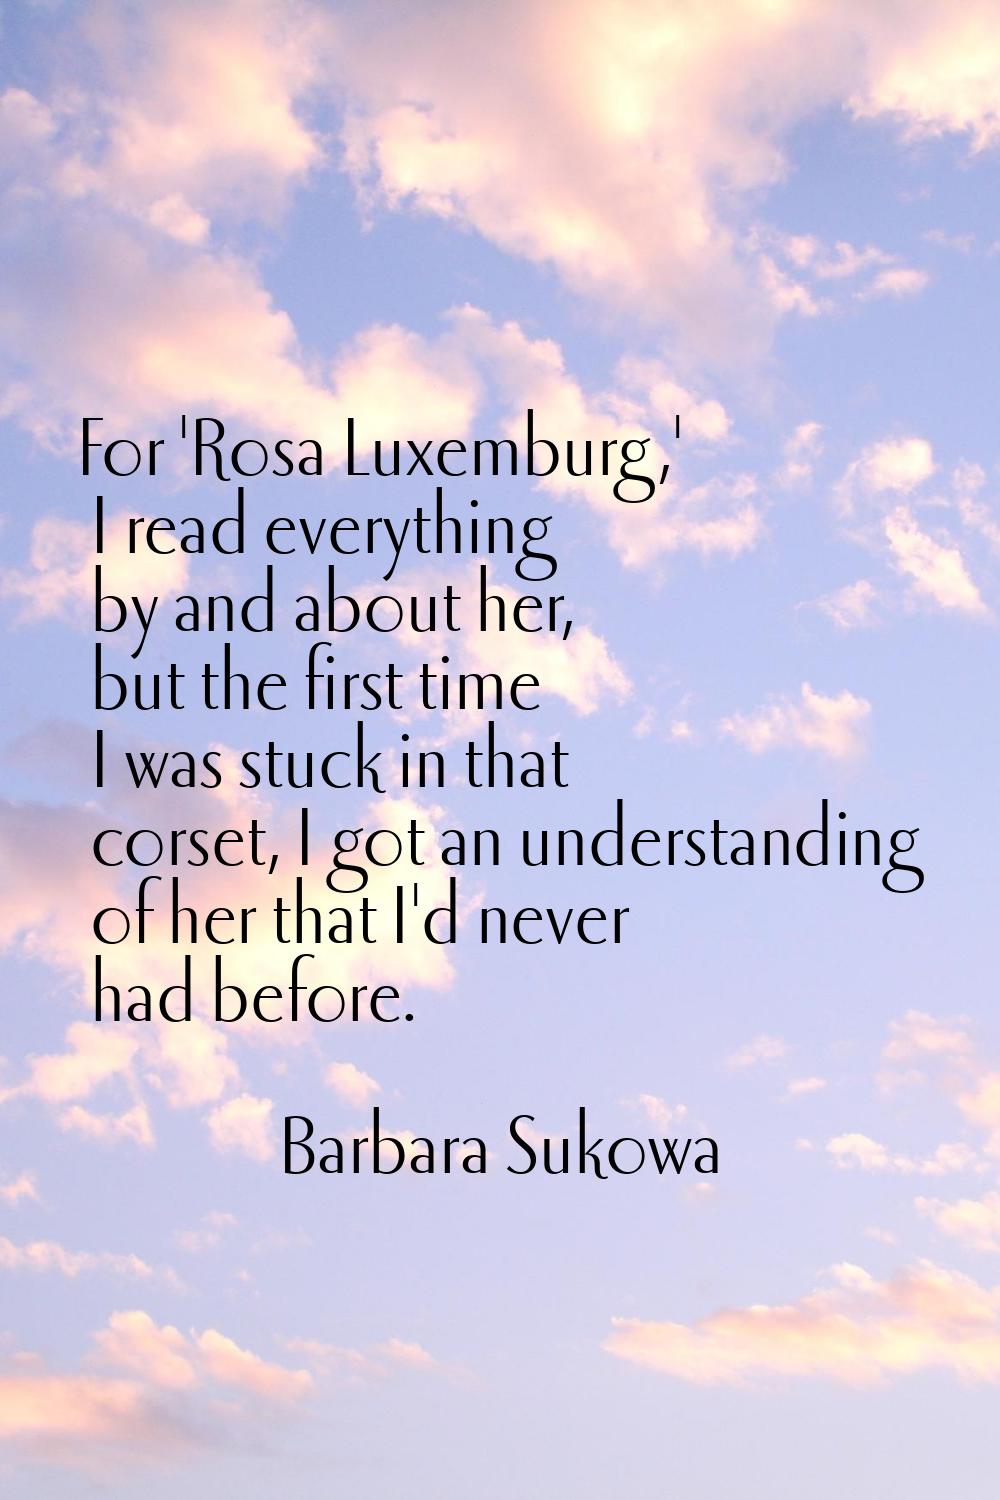 For 'Rosa Luxemburg,' I read everything by and about her, but the first time I was stuck in that co